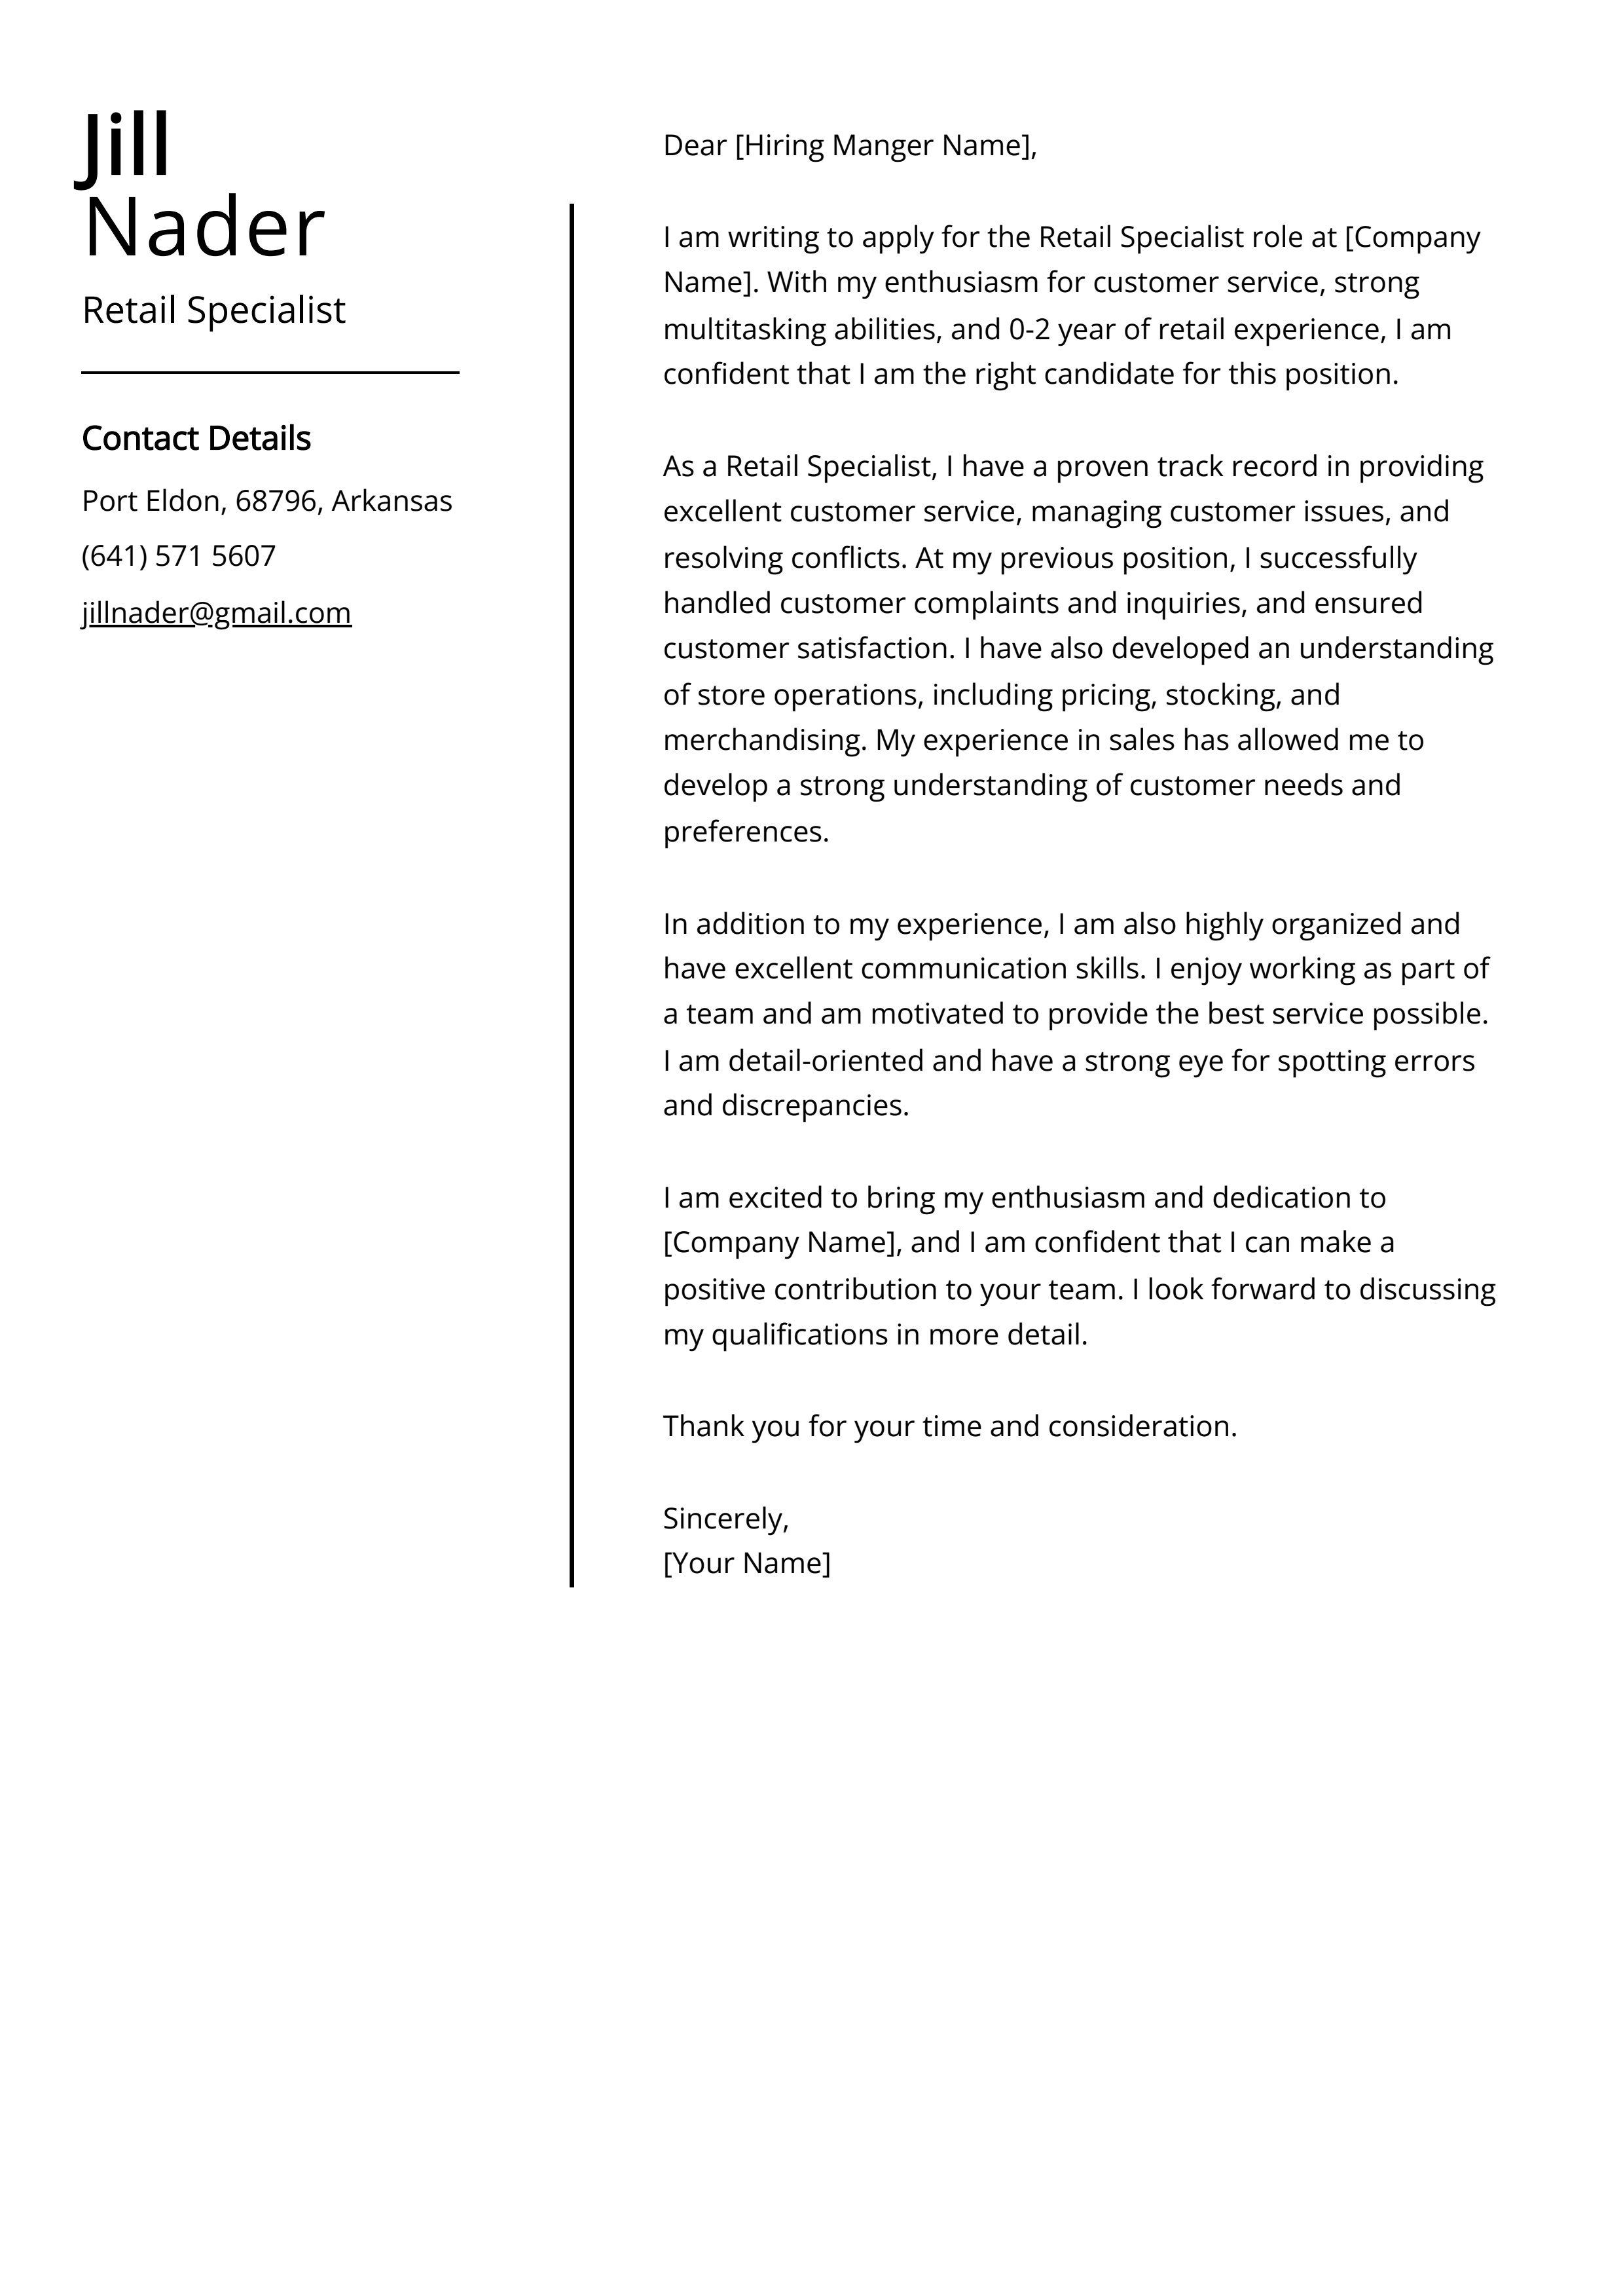 Retail Specialist Cover Letter Example